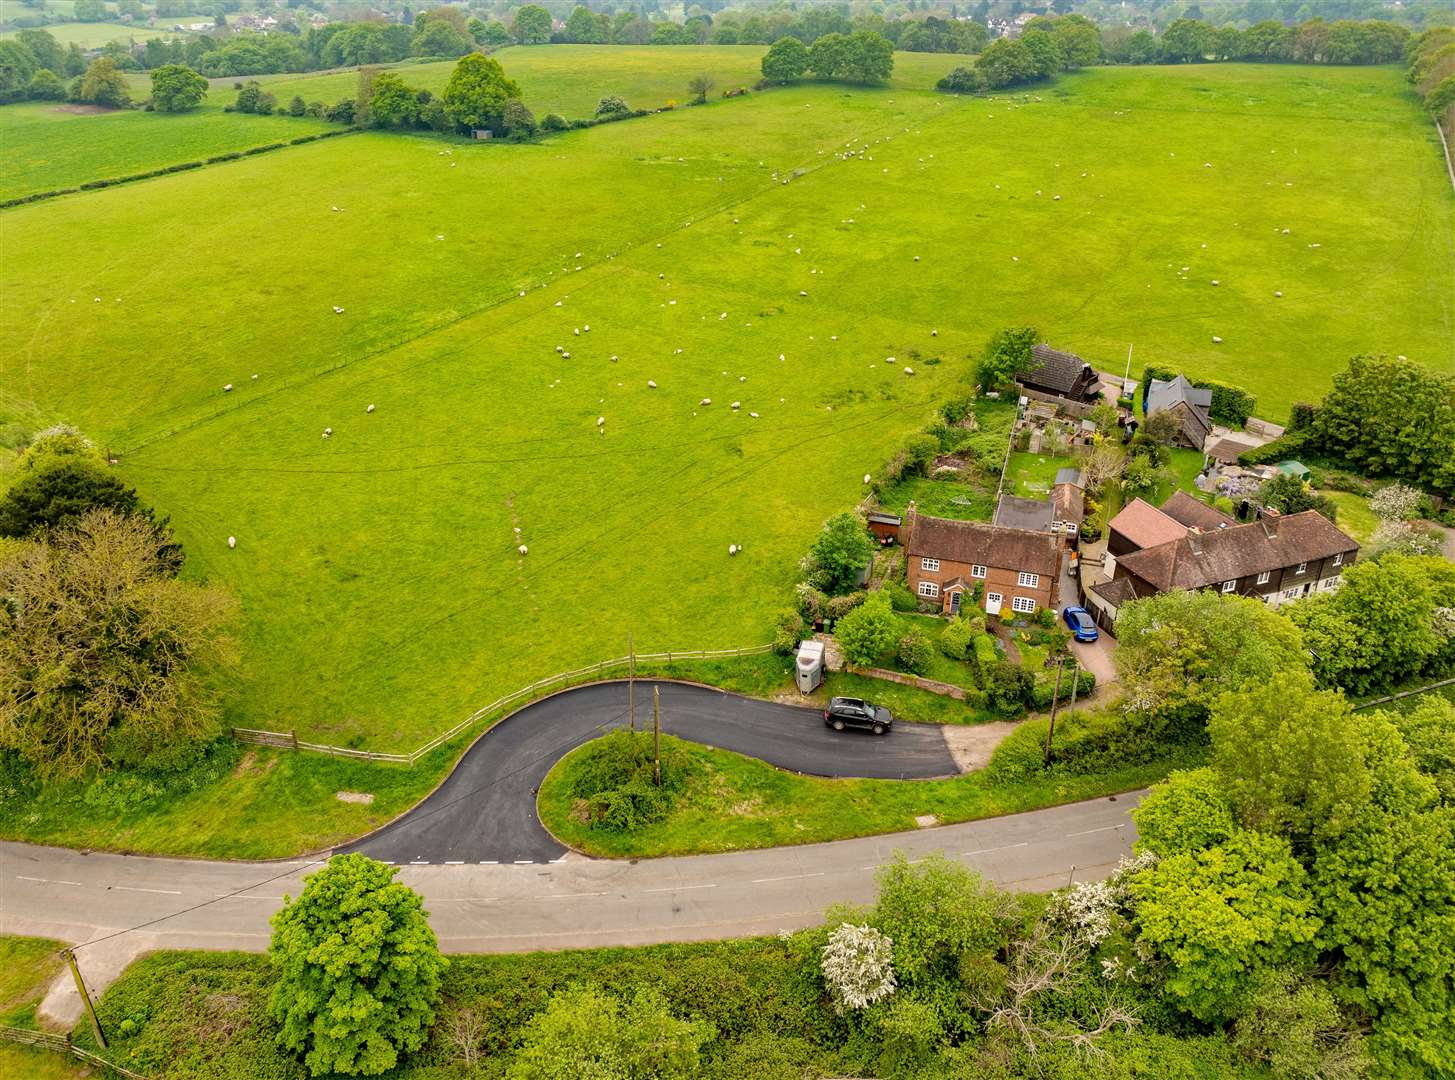 Bowyers Field Developments Limited is proposing to submit a planning application accompanied by an Environmental Statement for the development of a quarry to the west of Roughetts Road. Photo: Esprit Drone Services